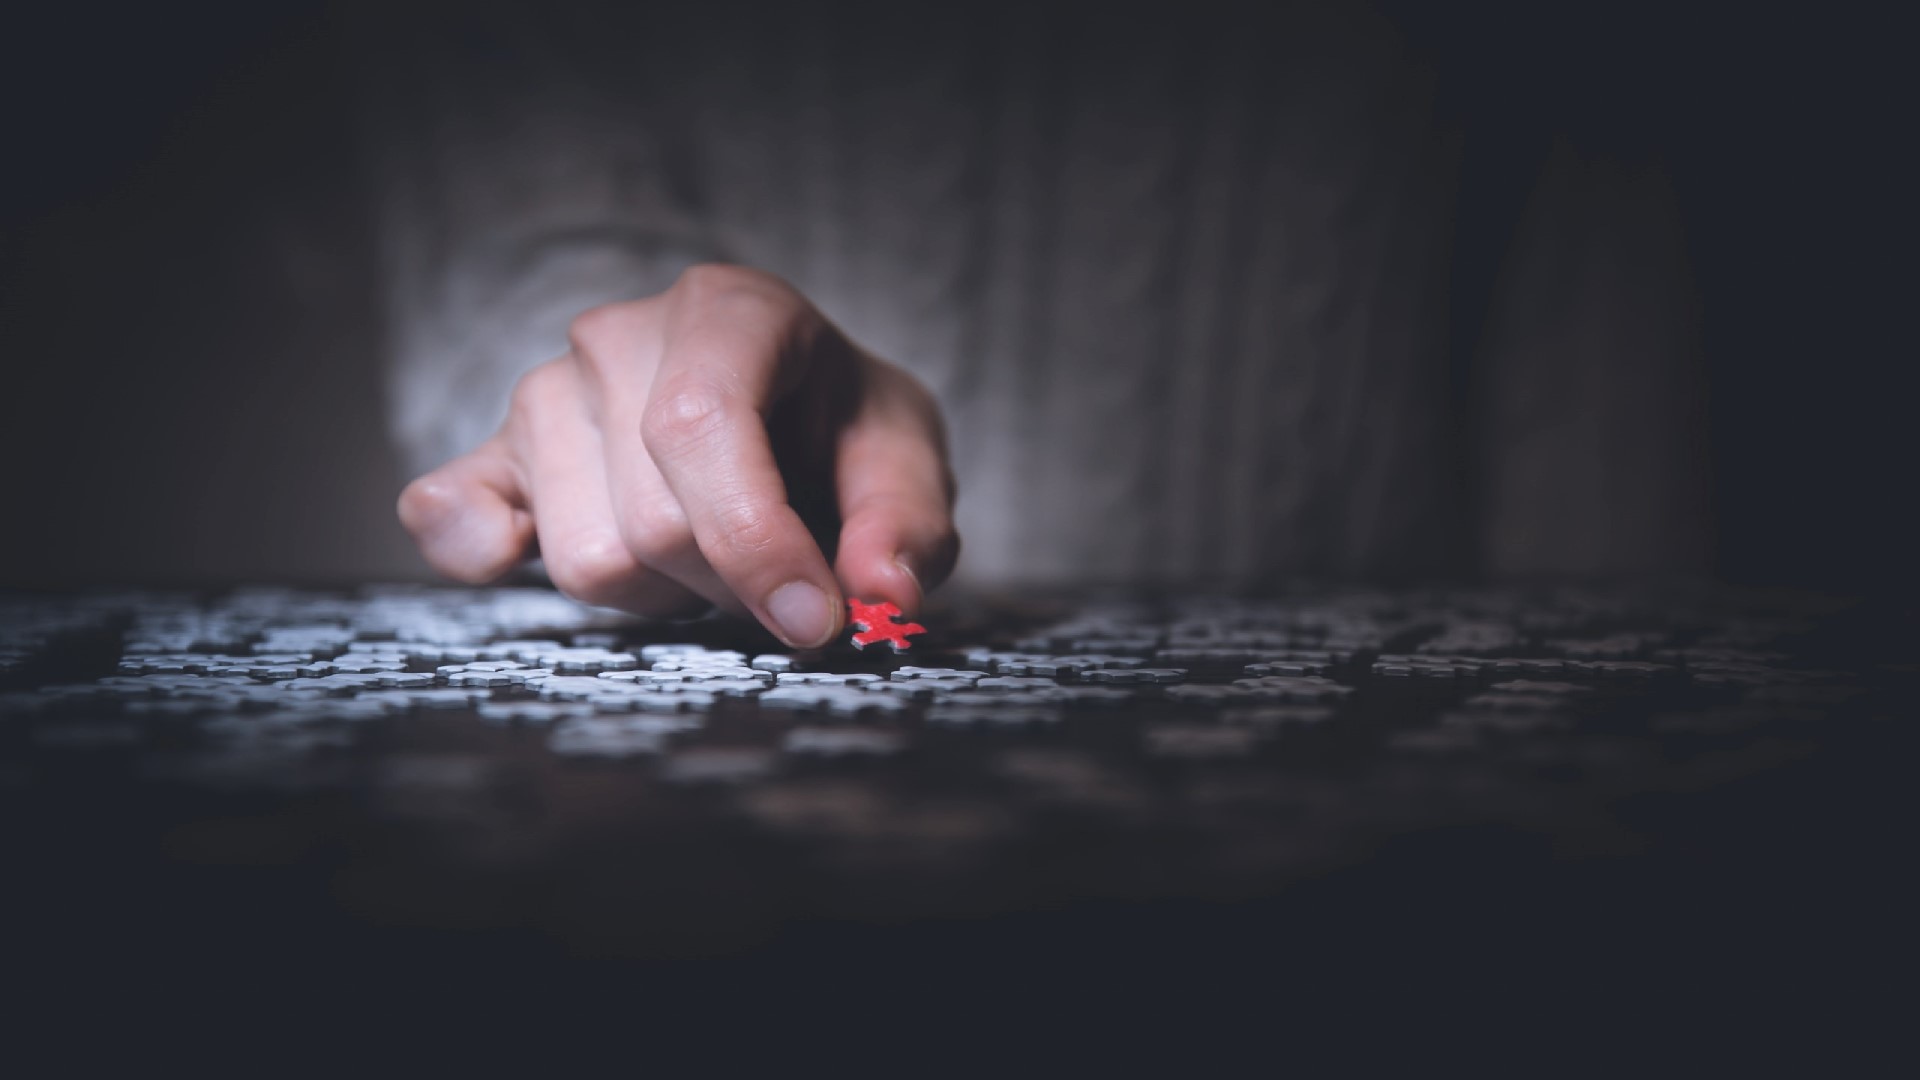 An image of a person solving a puzzle